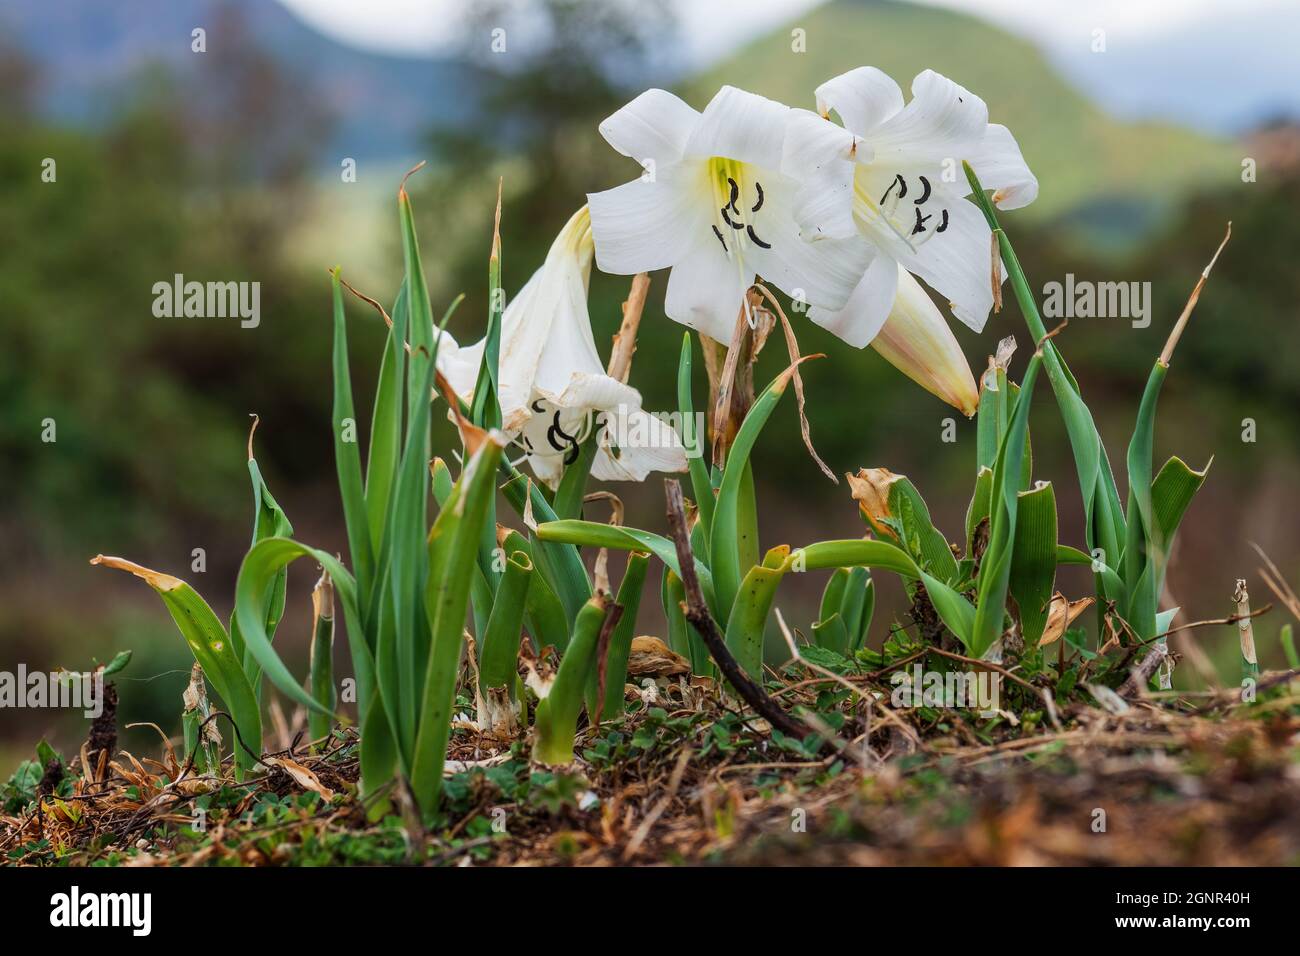 Swamplily - Crinum abyssinicum, beatiful white flowering plant from Ethiopean forests, Harrena forest, Bale mountains, Ethiopia. Stock Photo